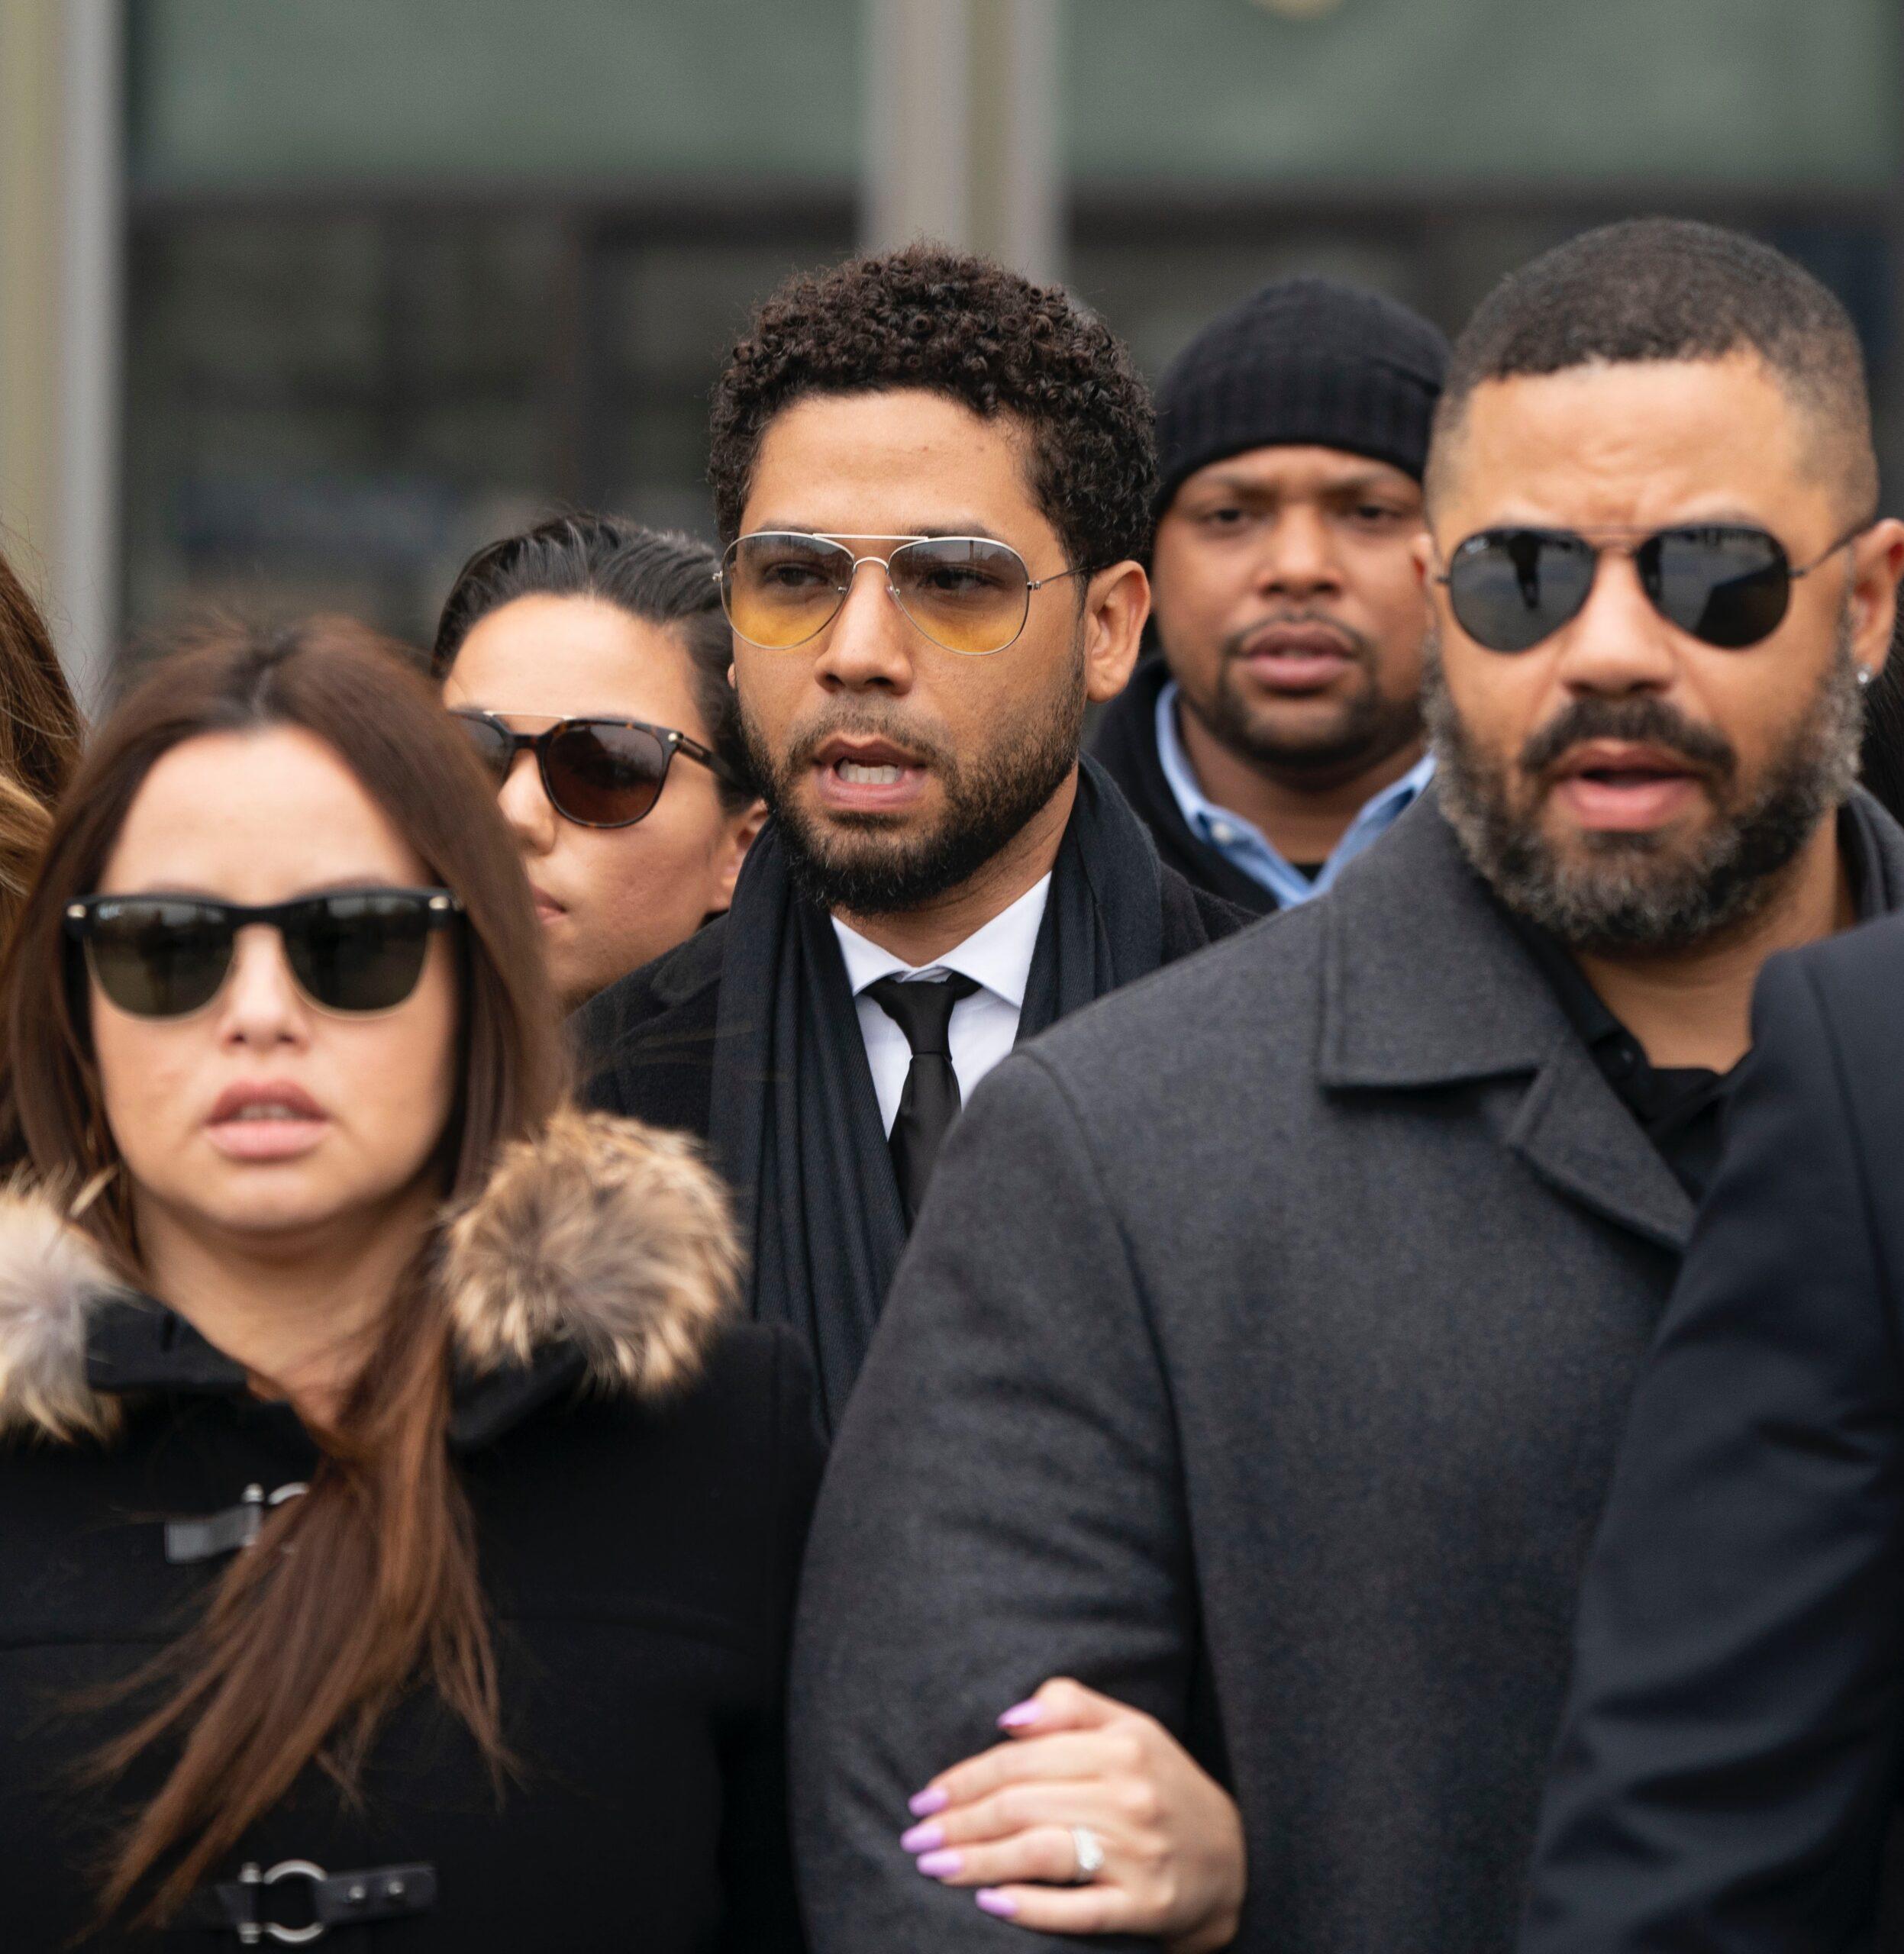 Jussie Smollett pleads not guilty to felony charges in Chicago court